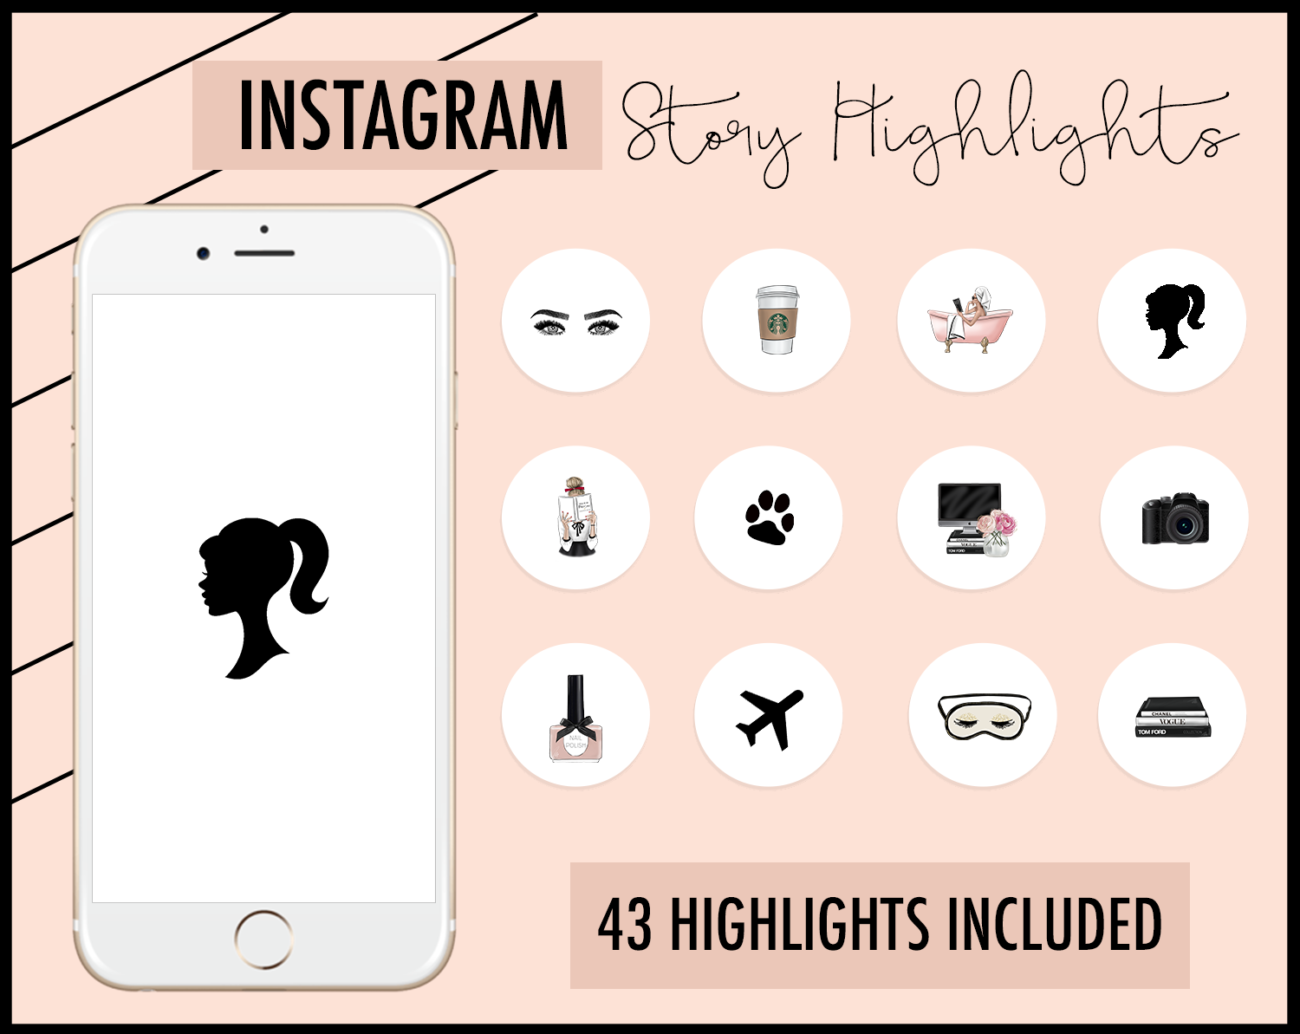 Instagram Story Highlights | Peachy Pink Instagram | Instagram Tips | Instagram Design | Blondie in the City by Hayley Larue